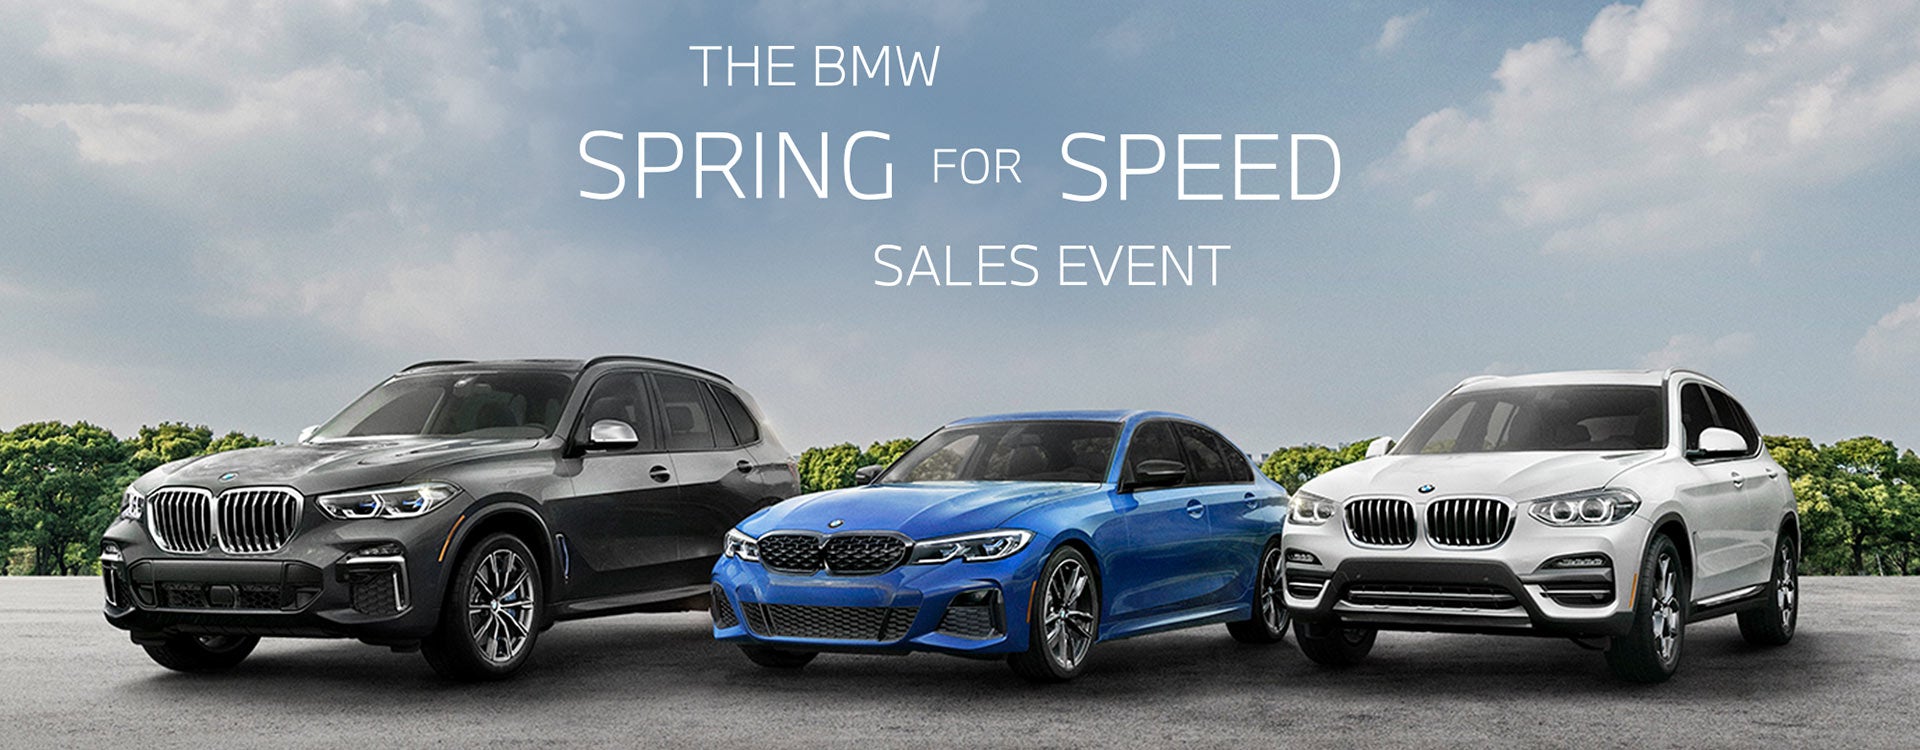 Spring For Speed Sales Event | BMW of Akron in Akron OH